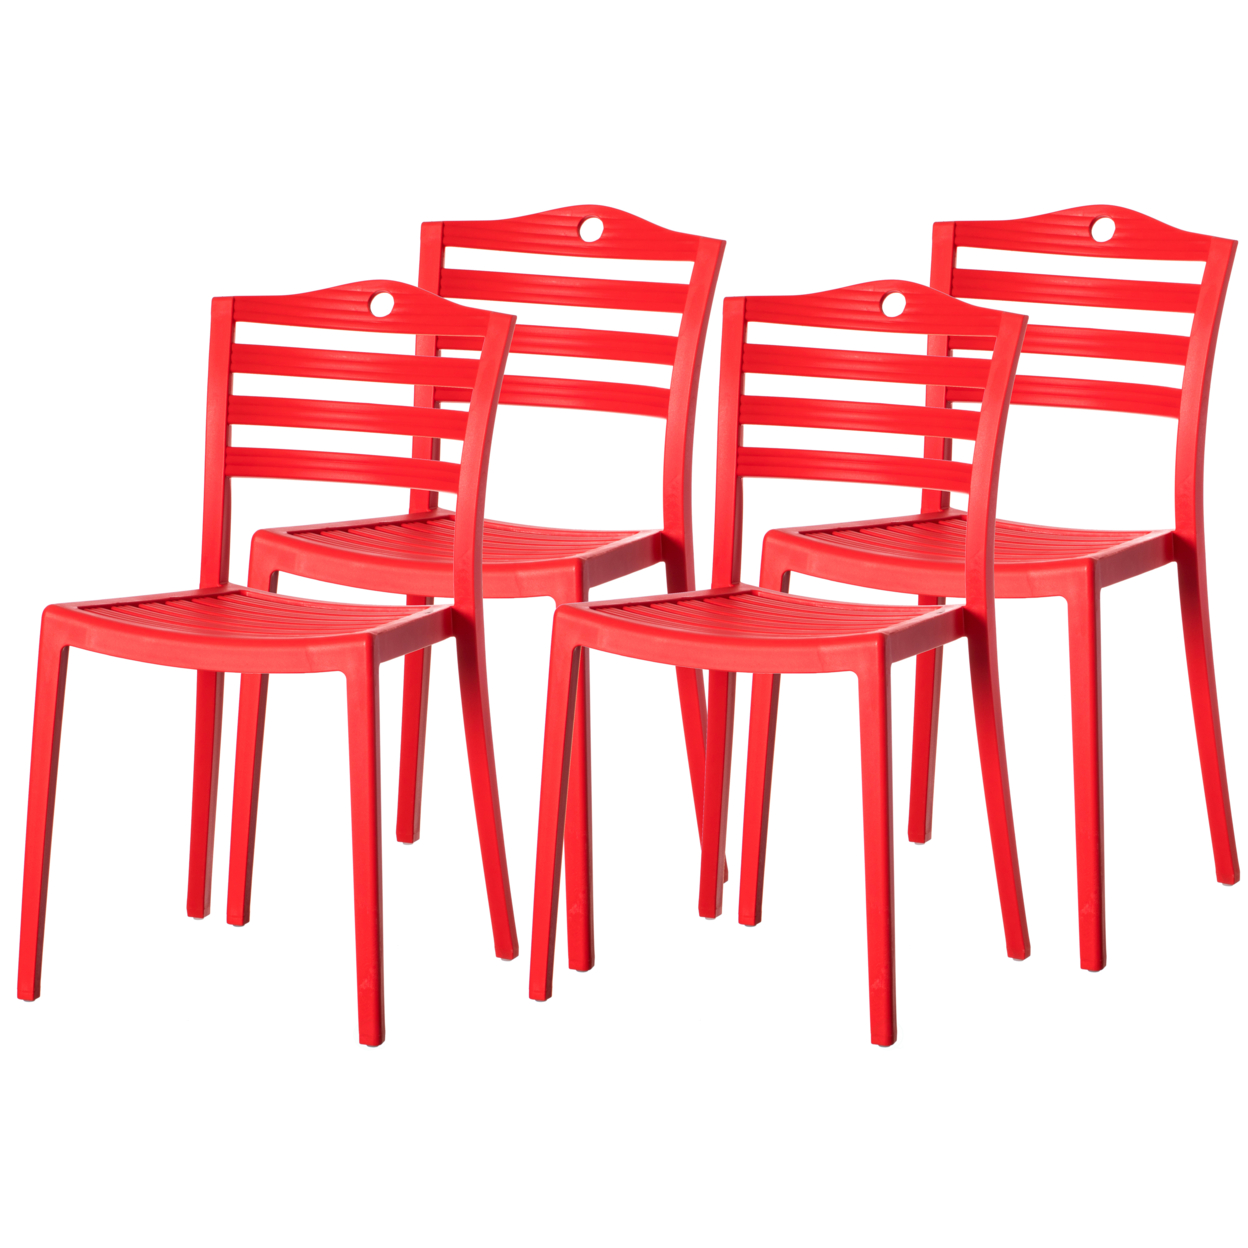 Stackable Modern Plastic Indoor And Outdoor Dining Chair With Ladderback Design For All Weather Use - Set Of 4 Red